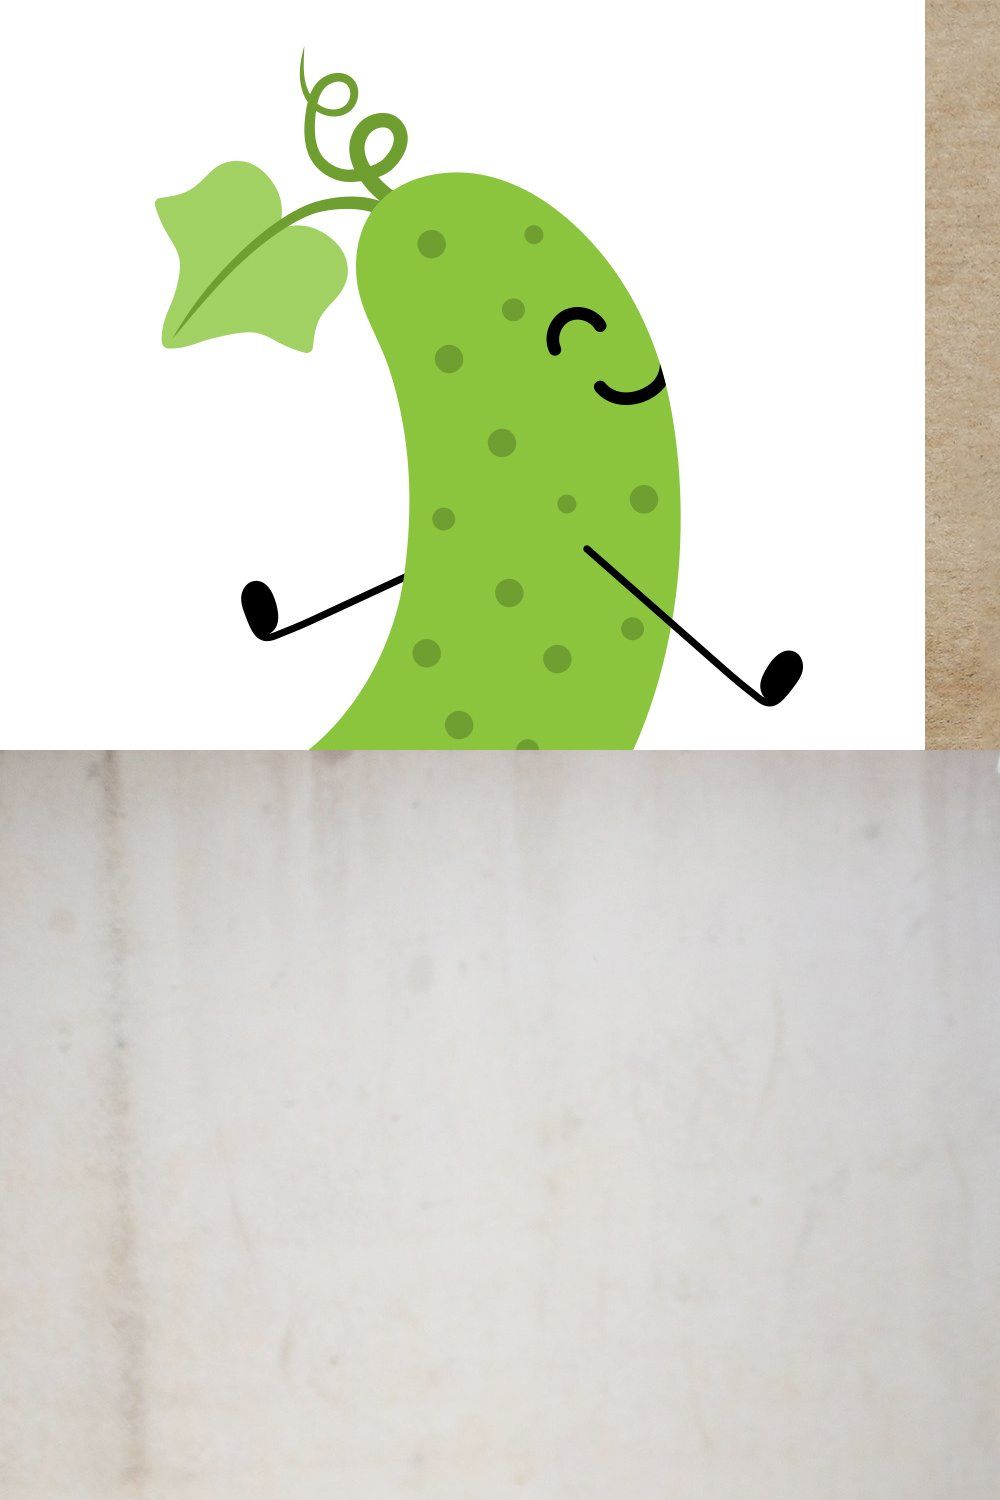 Cucumber cartoon cute happy smiling pinterest preview image.